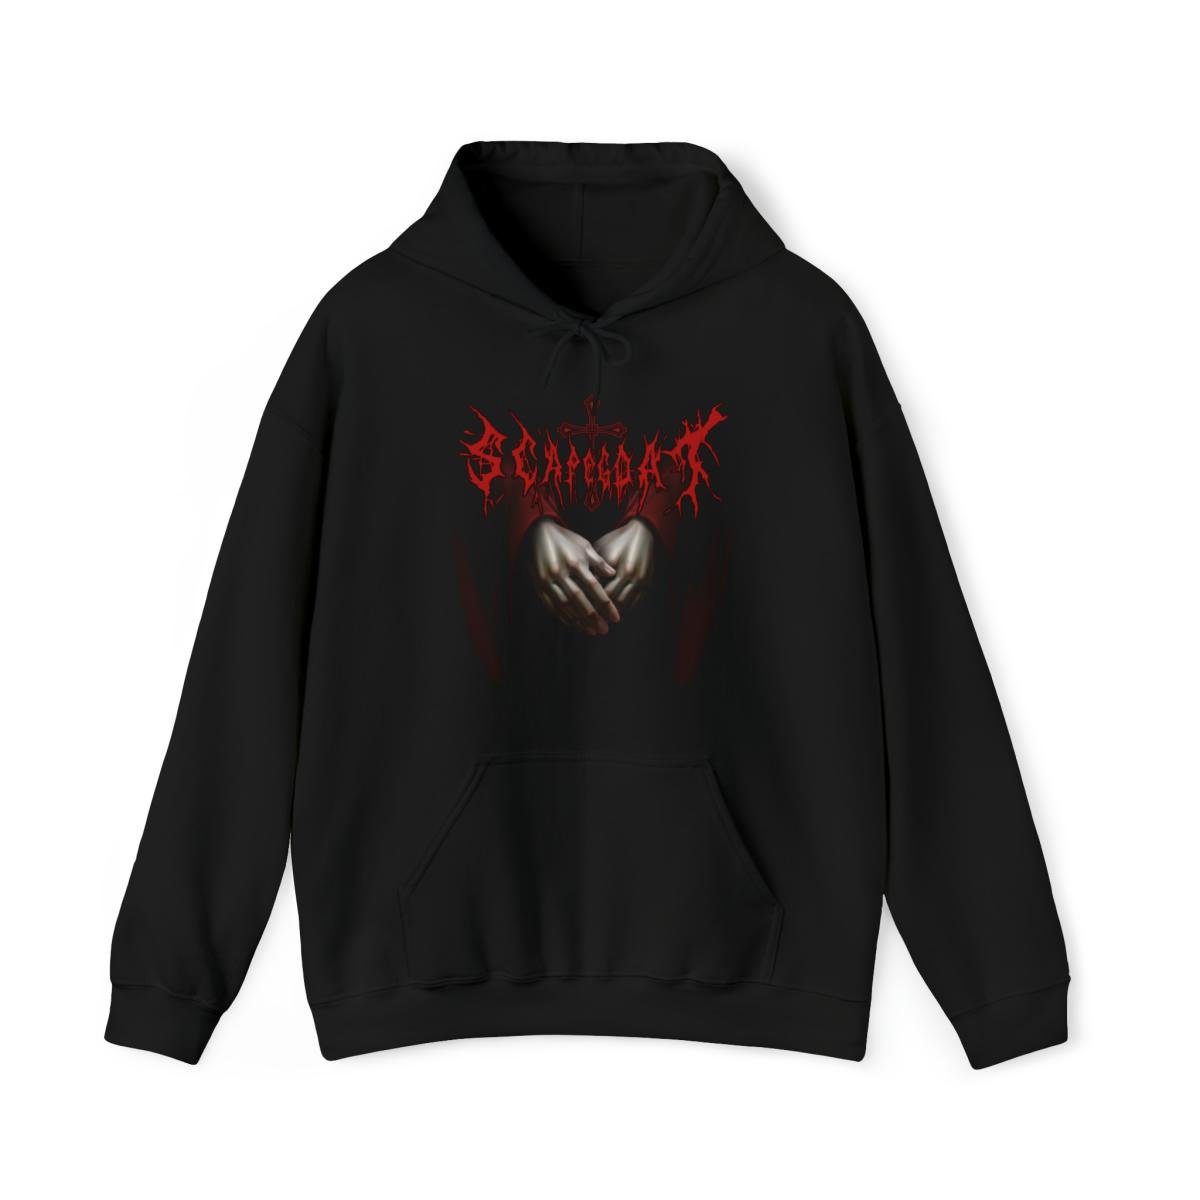 Scapegoat – Solemnity Pullover Hooded Sweatshirt